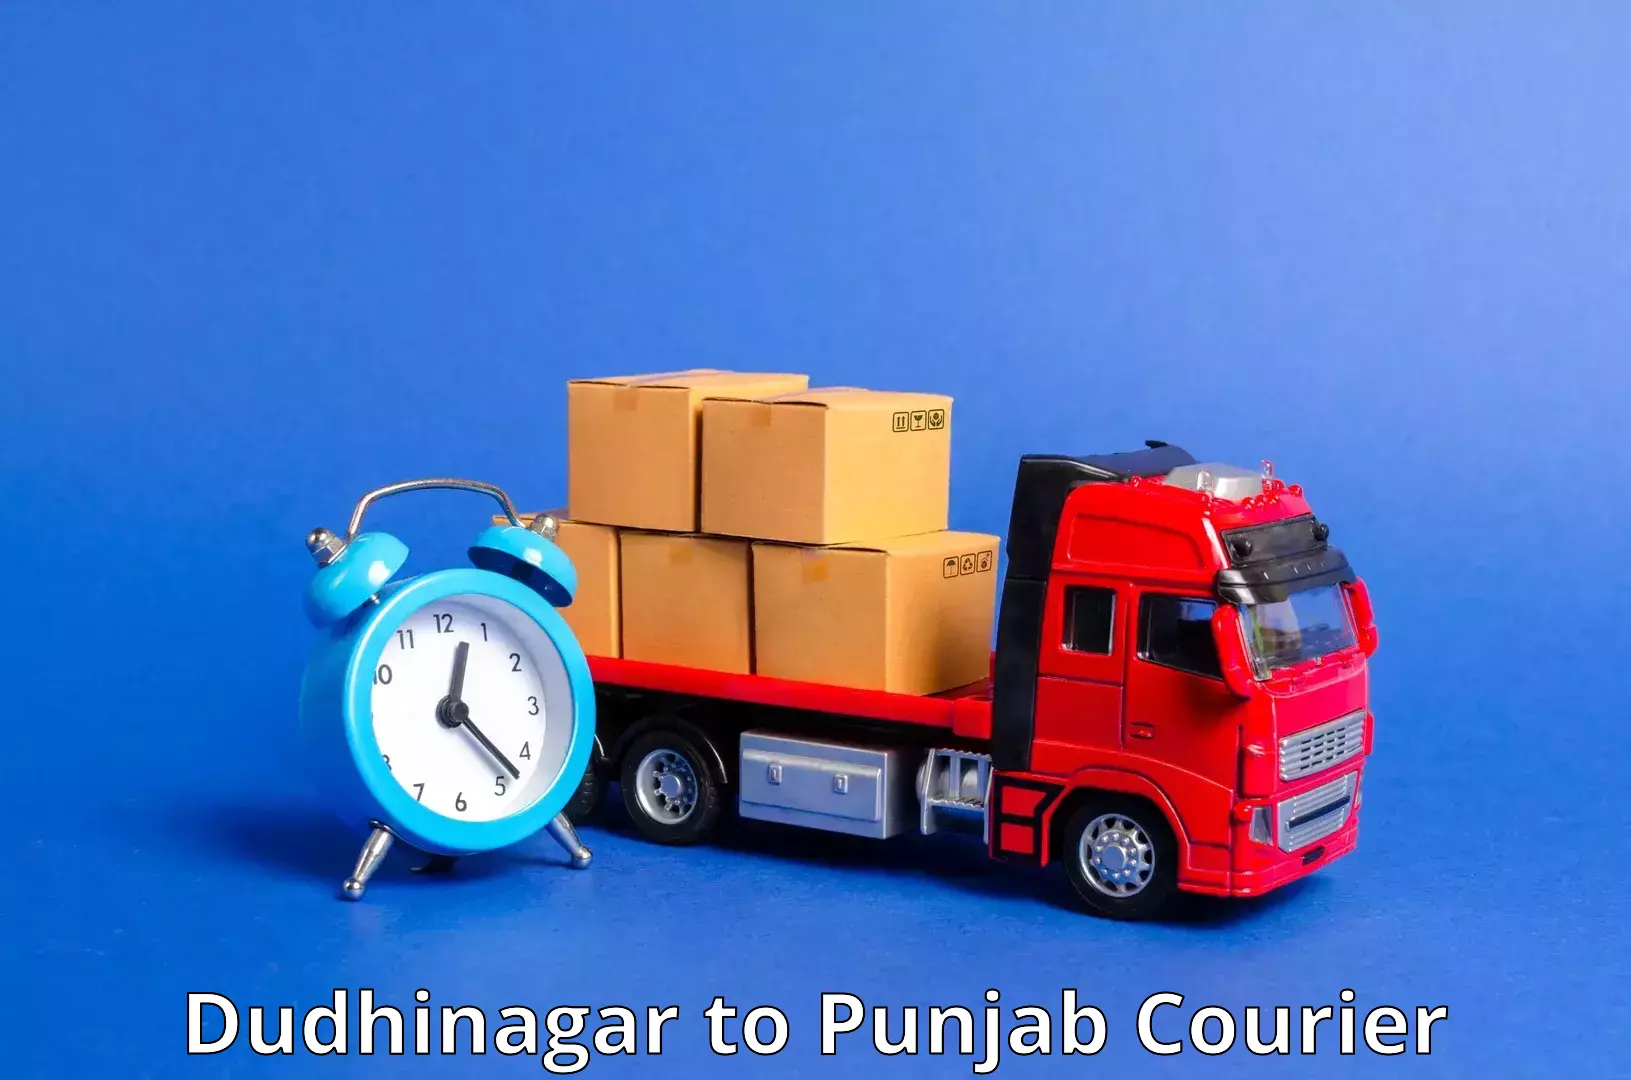 Express postal services in Dudhinagar to Mohali